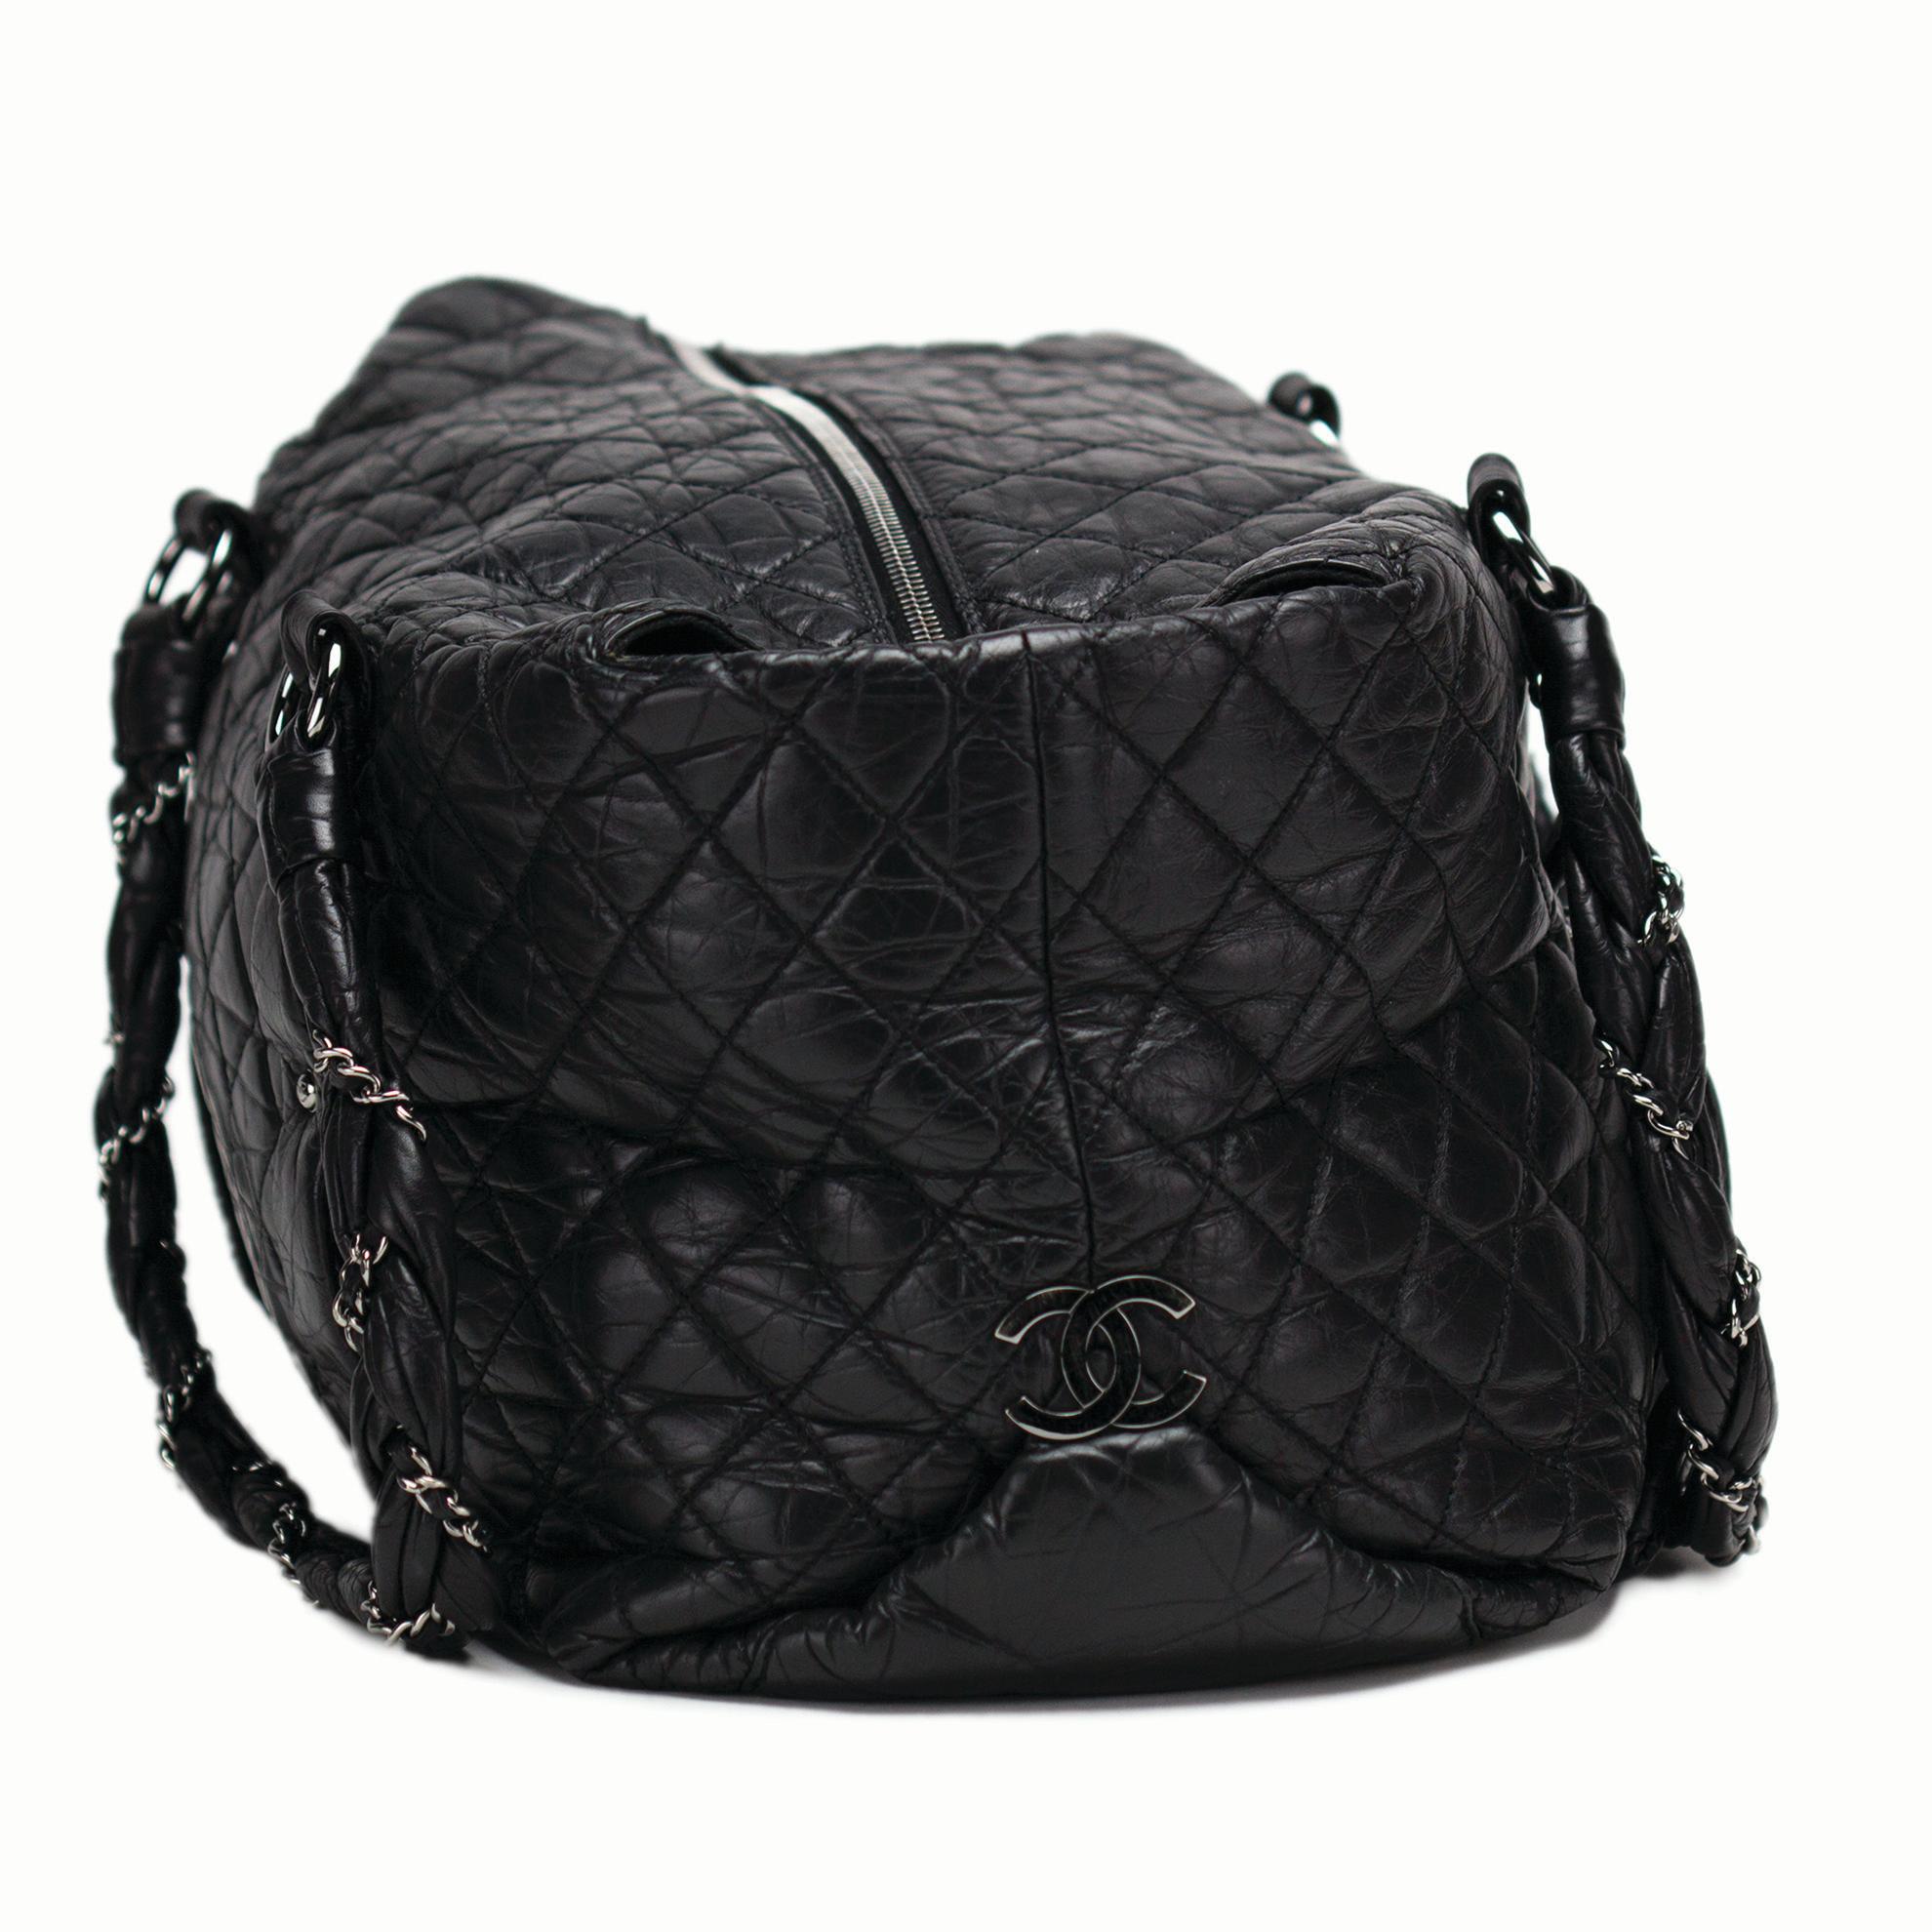 Chanel 2006 Soft Plush Quilted Distressed Leather Large Carry-On Travel Tote Bag For Sale 5